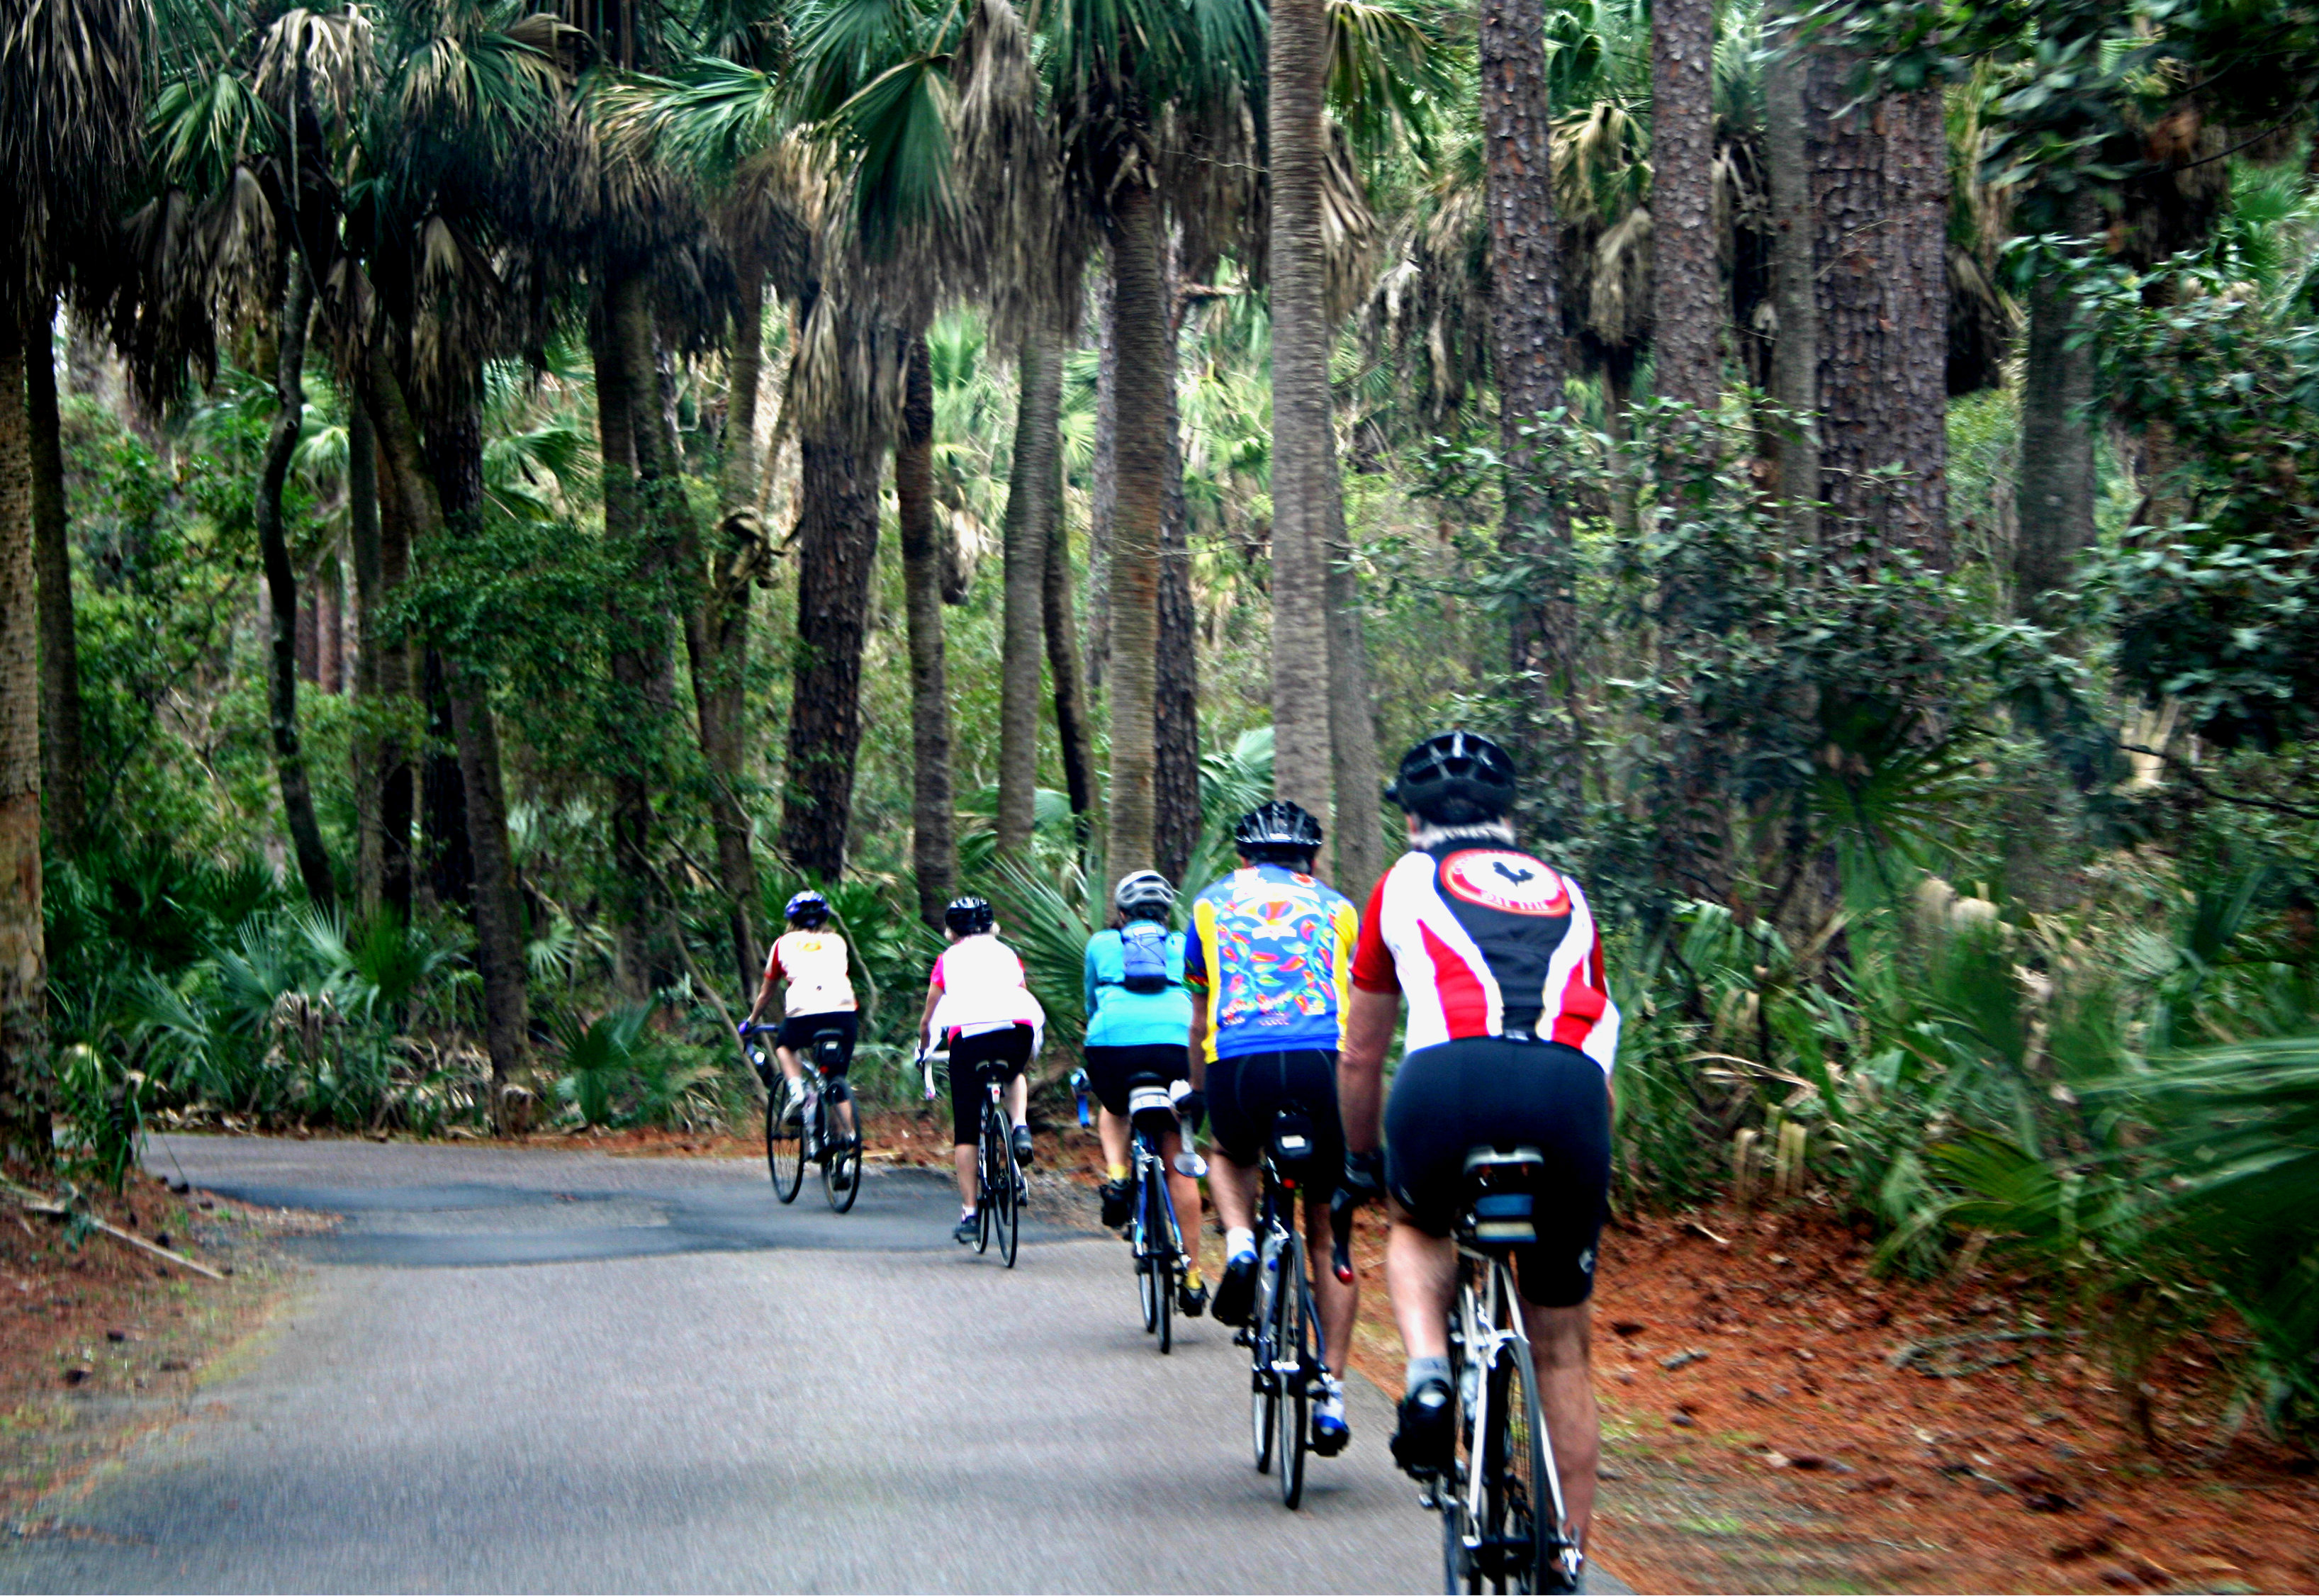 Hunting Island offers lots of options. Bicycling, hiking along one of the trails, going for a challenging run on the beach or even taking a stroll while searching for shells